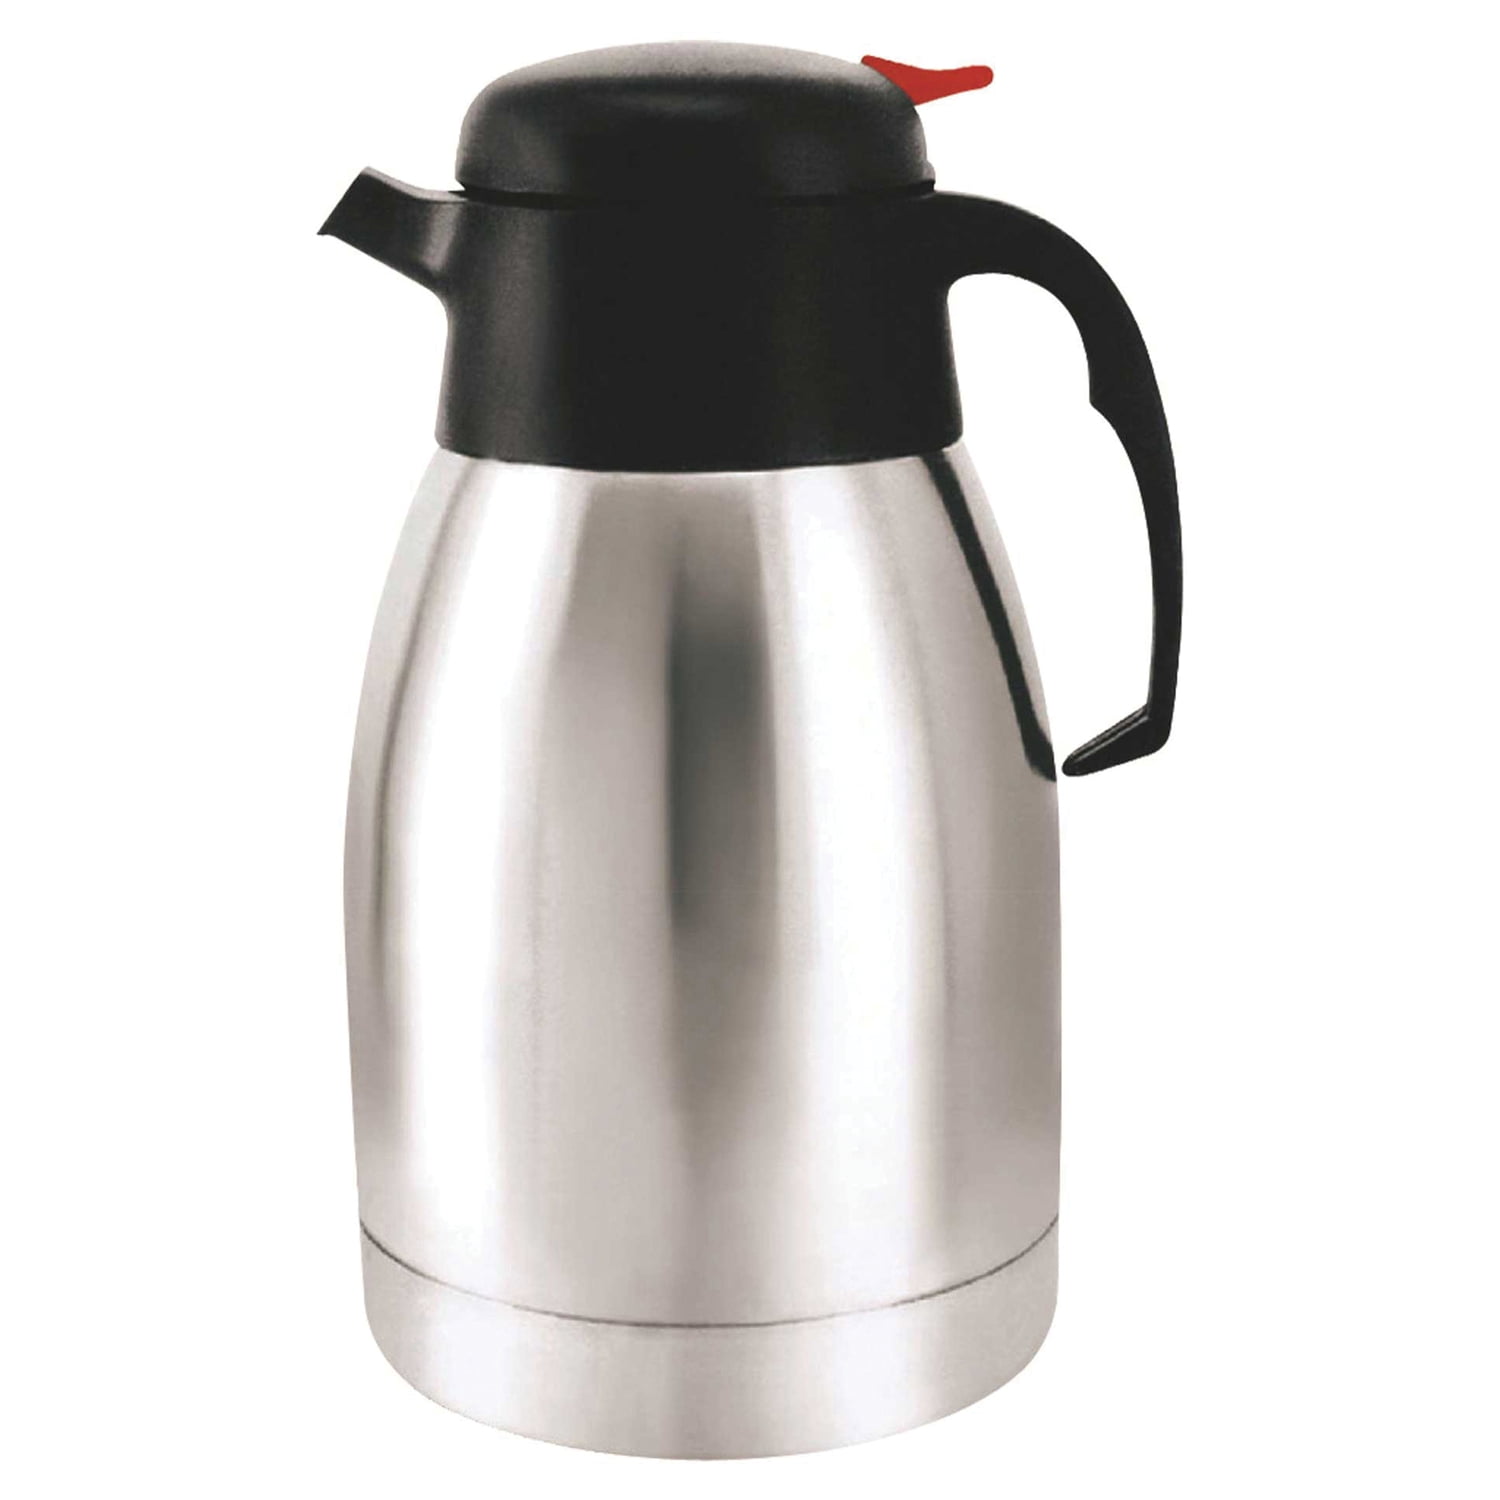 Restpresso 3 gal Silver 13/0 Stainless Steel Coffee Urn - 67 Cup - 8